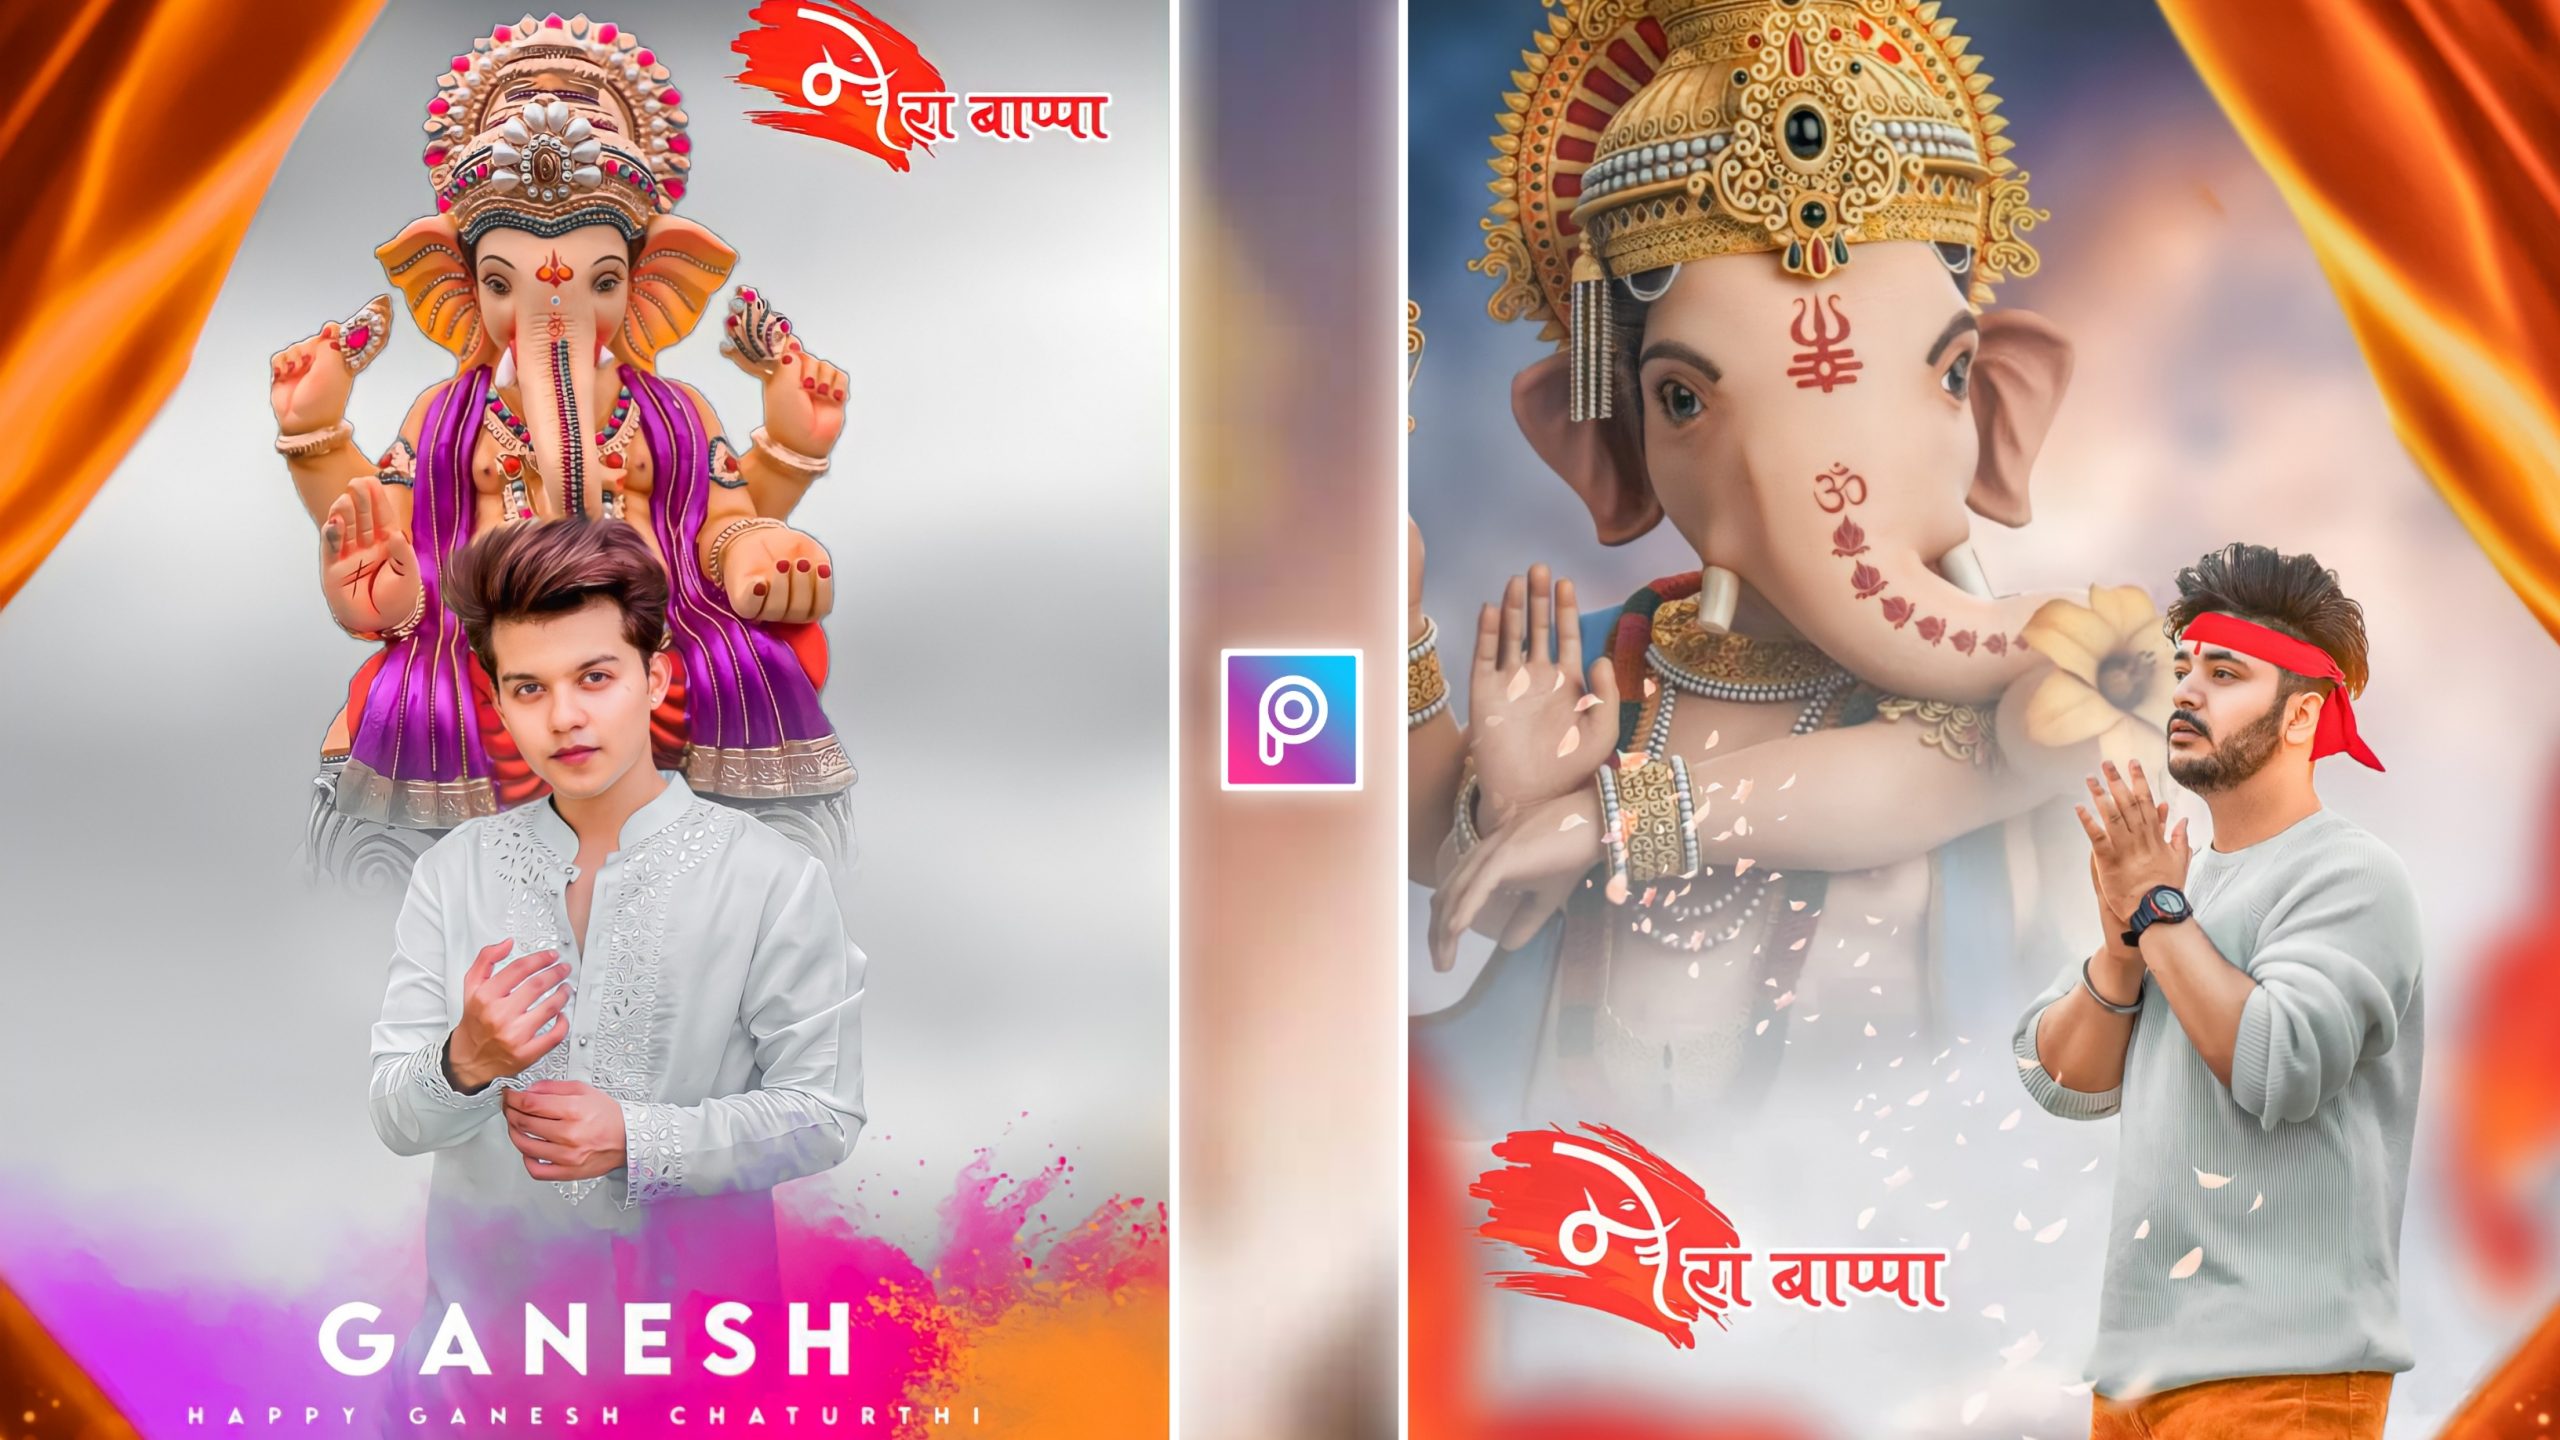 Ganesh Chaturthi Photo Editing Download Background And PNG Archives - Tahir  Editz